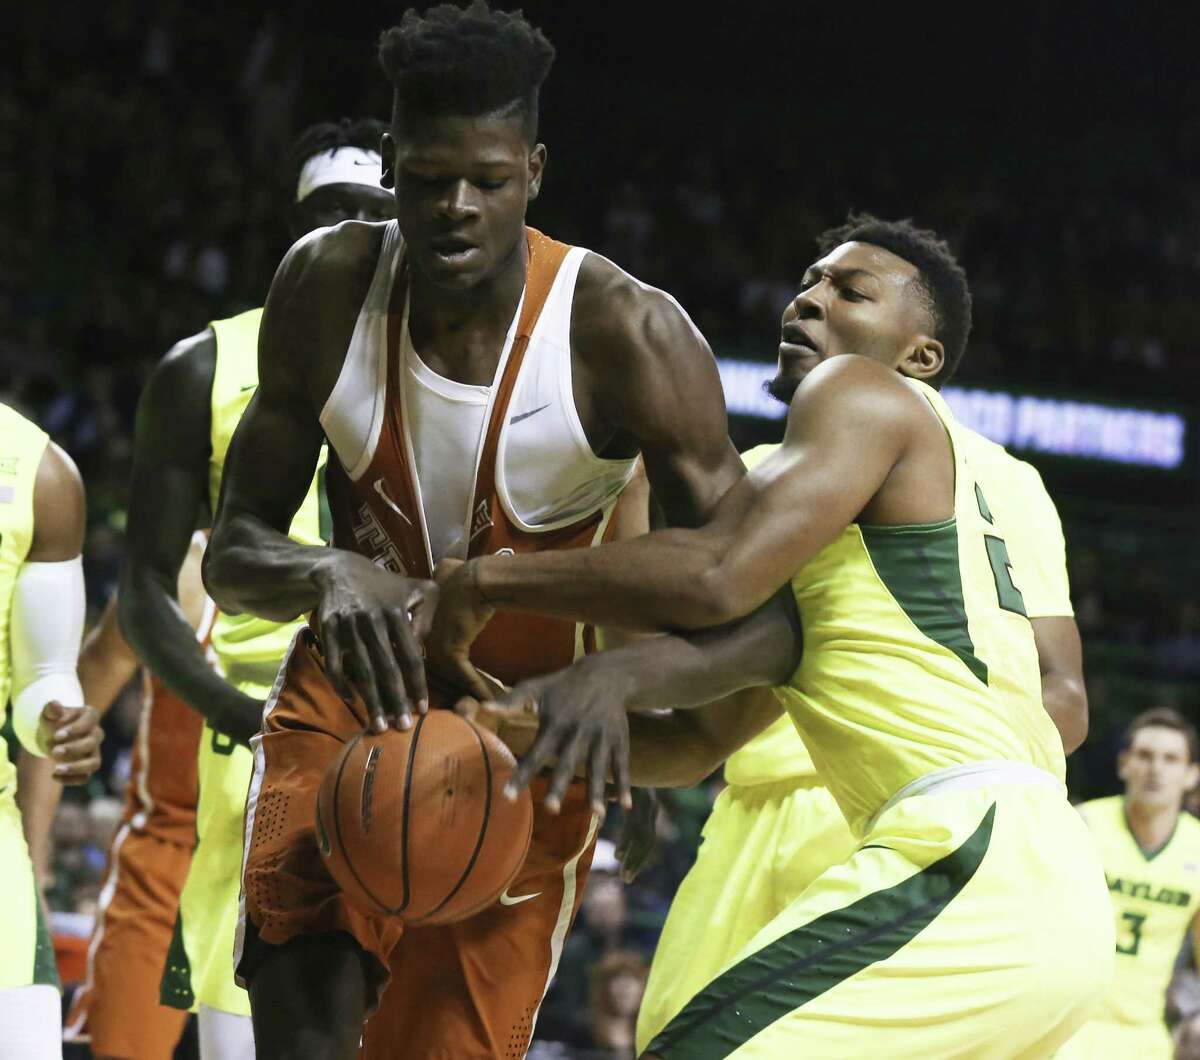 Texas forward Mohamed Bamba, left, reaches for a loose rebound with Baylor guard King McClure, right, in the first half of an NCAA college basketball game, Saturday, Jan. 6, 2018, in Waco, Texas. (Rod Aydelotte/Waco Tribune Herald via AP)